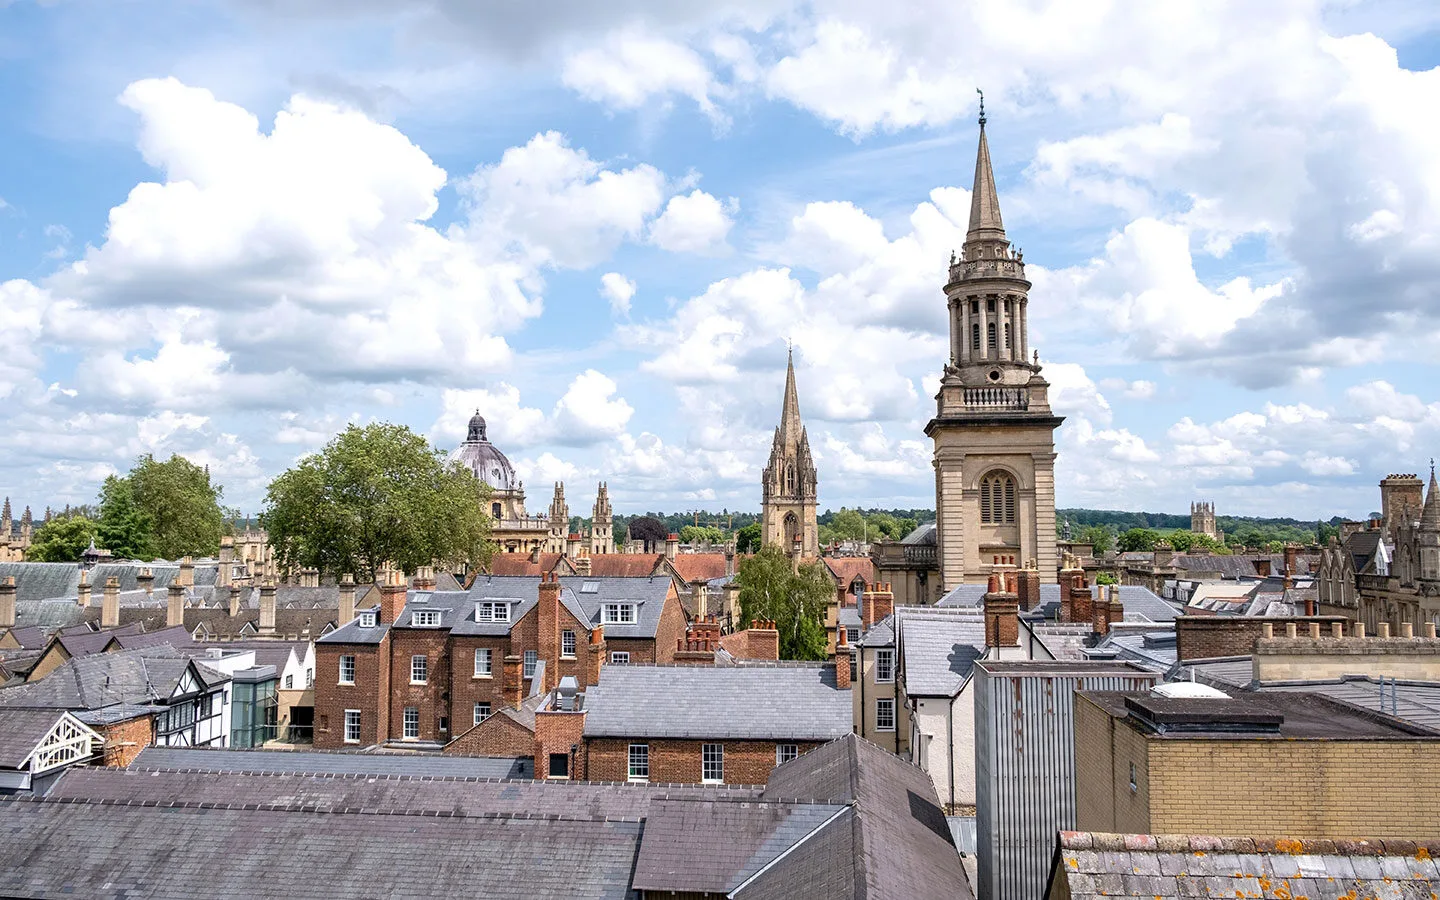 Views from the Varsity Club rooftop bar in Oxford